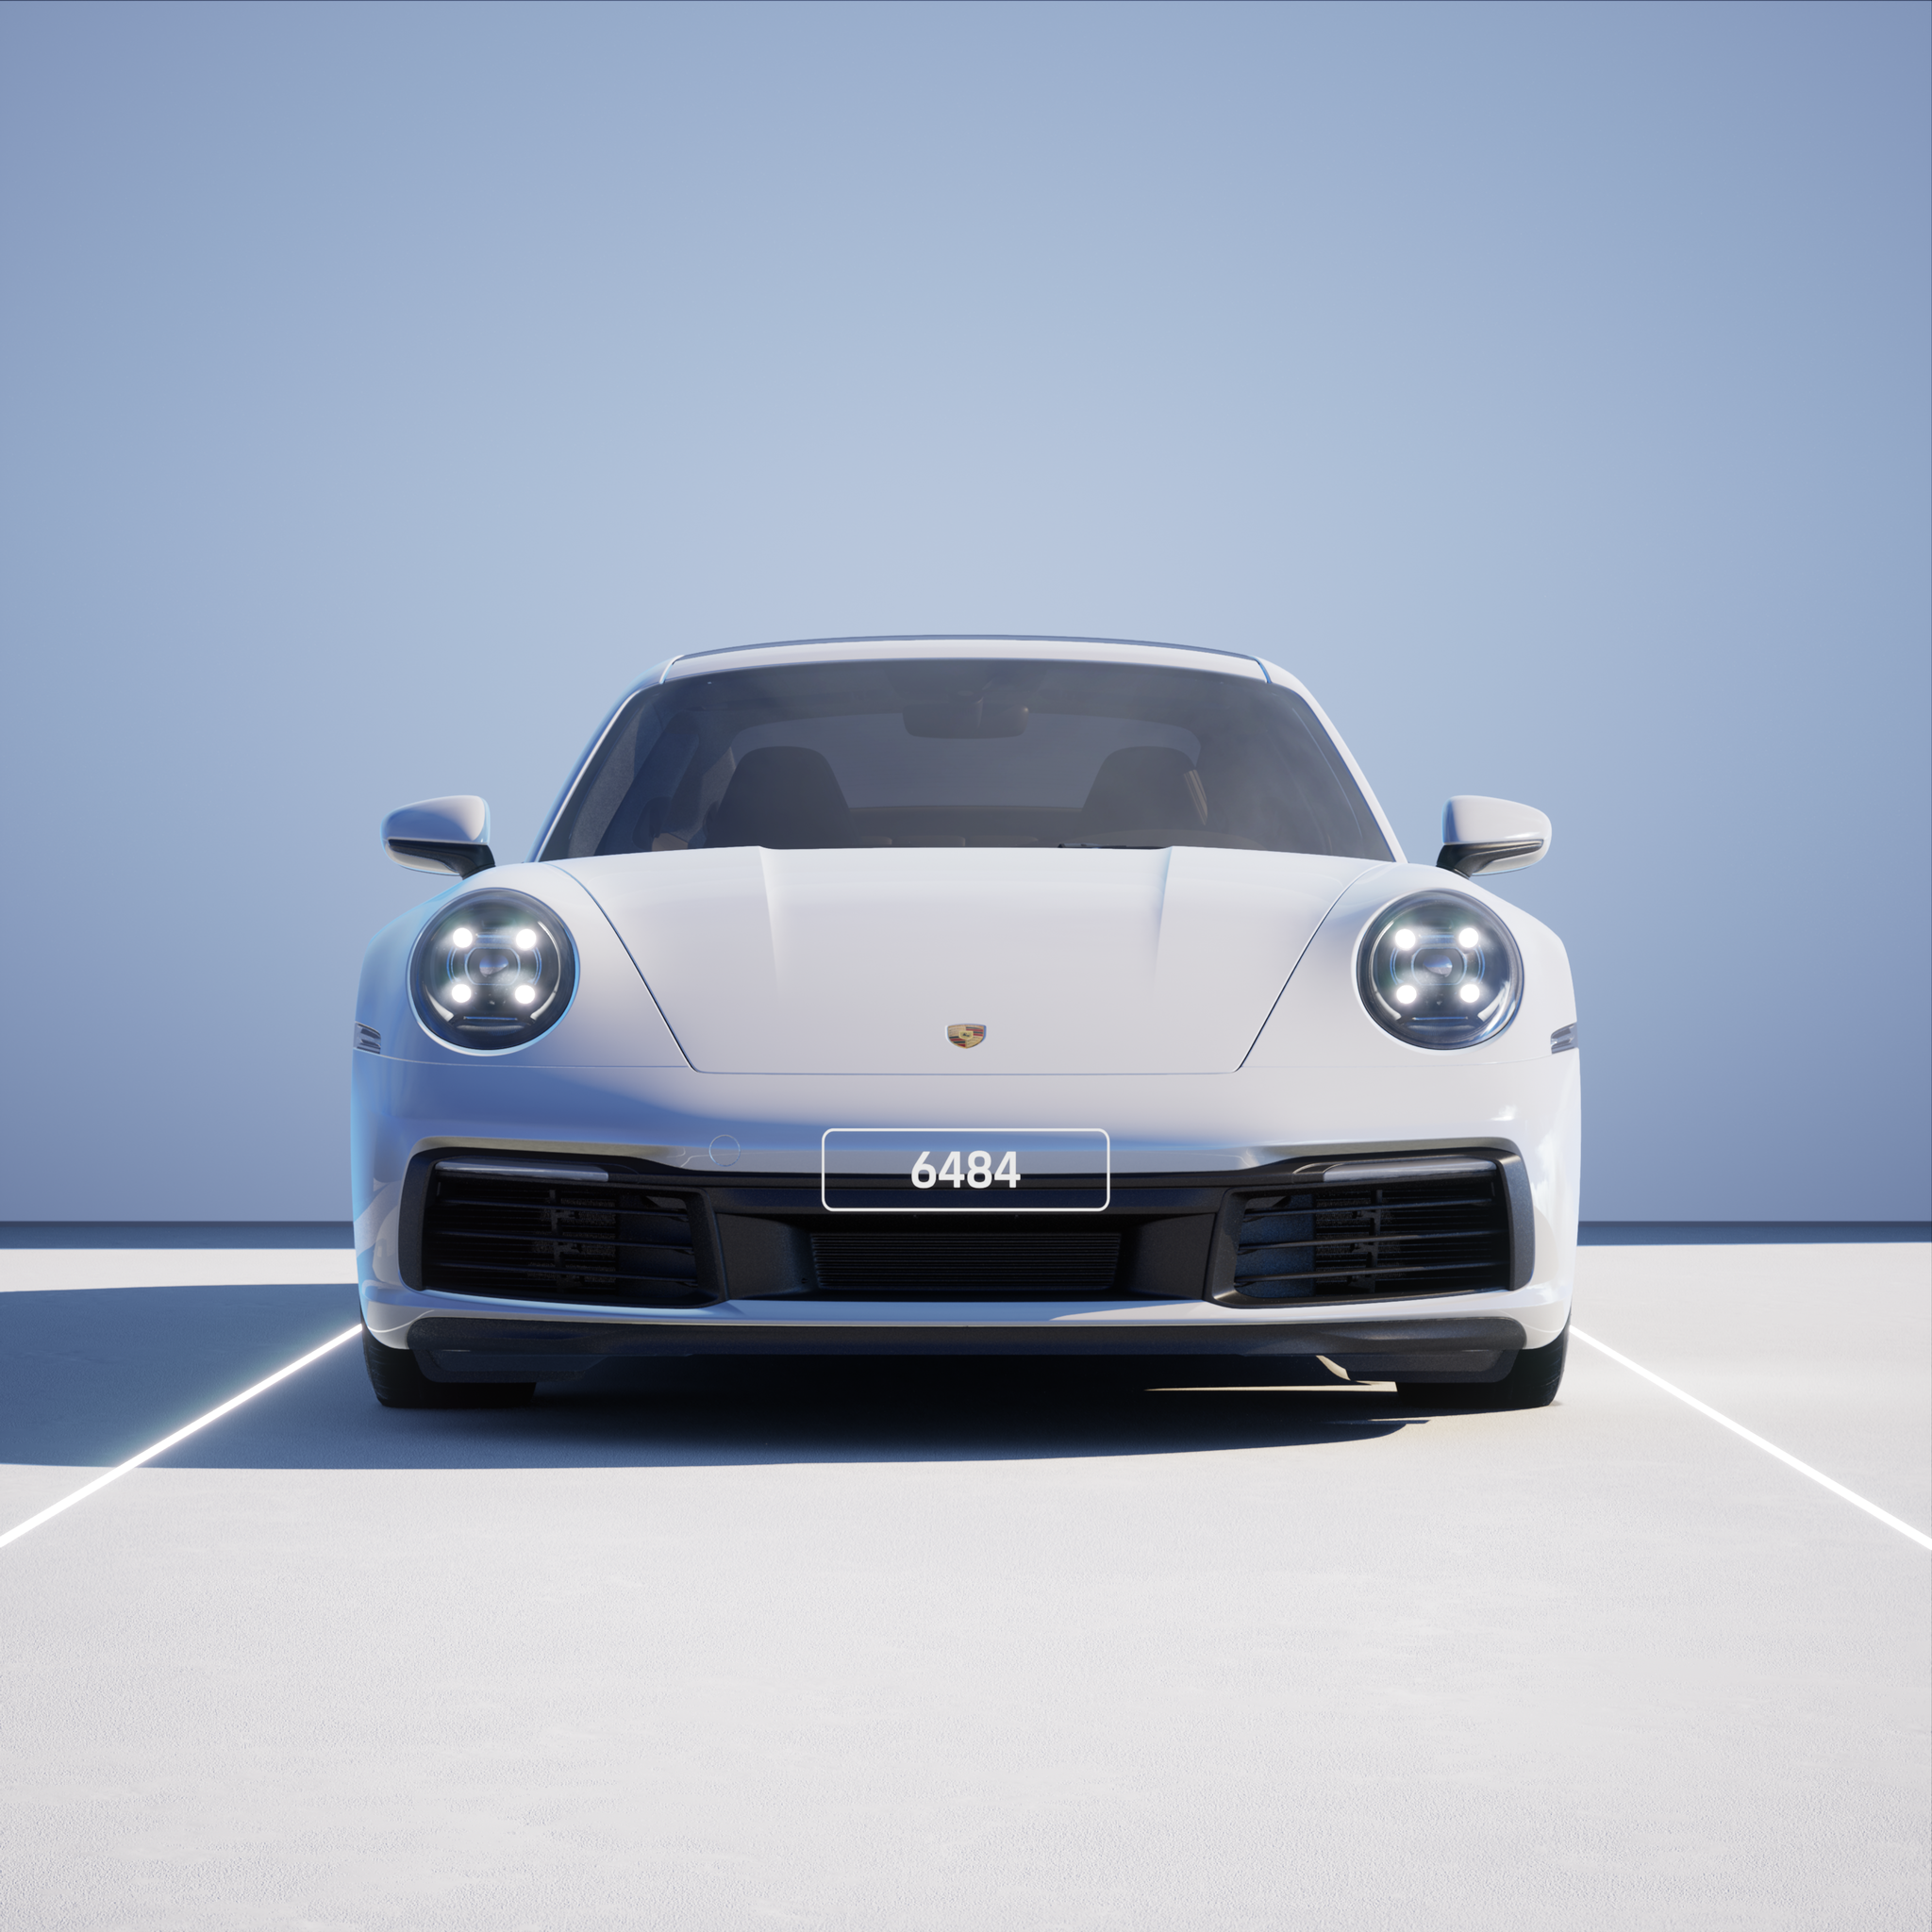 The PORSCHΞ 911 6484 image in phase